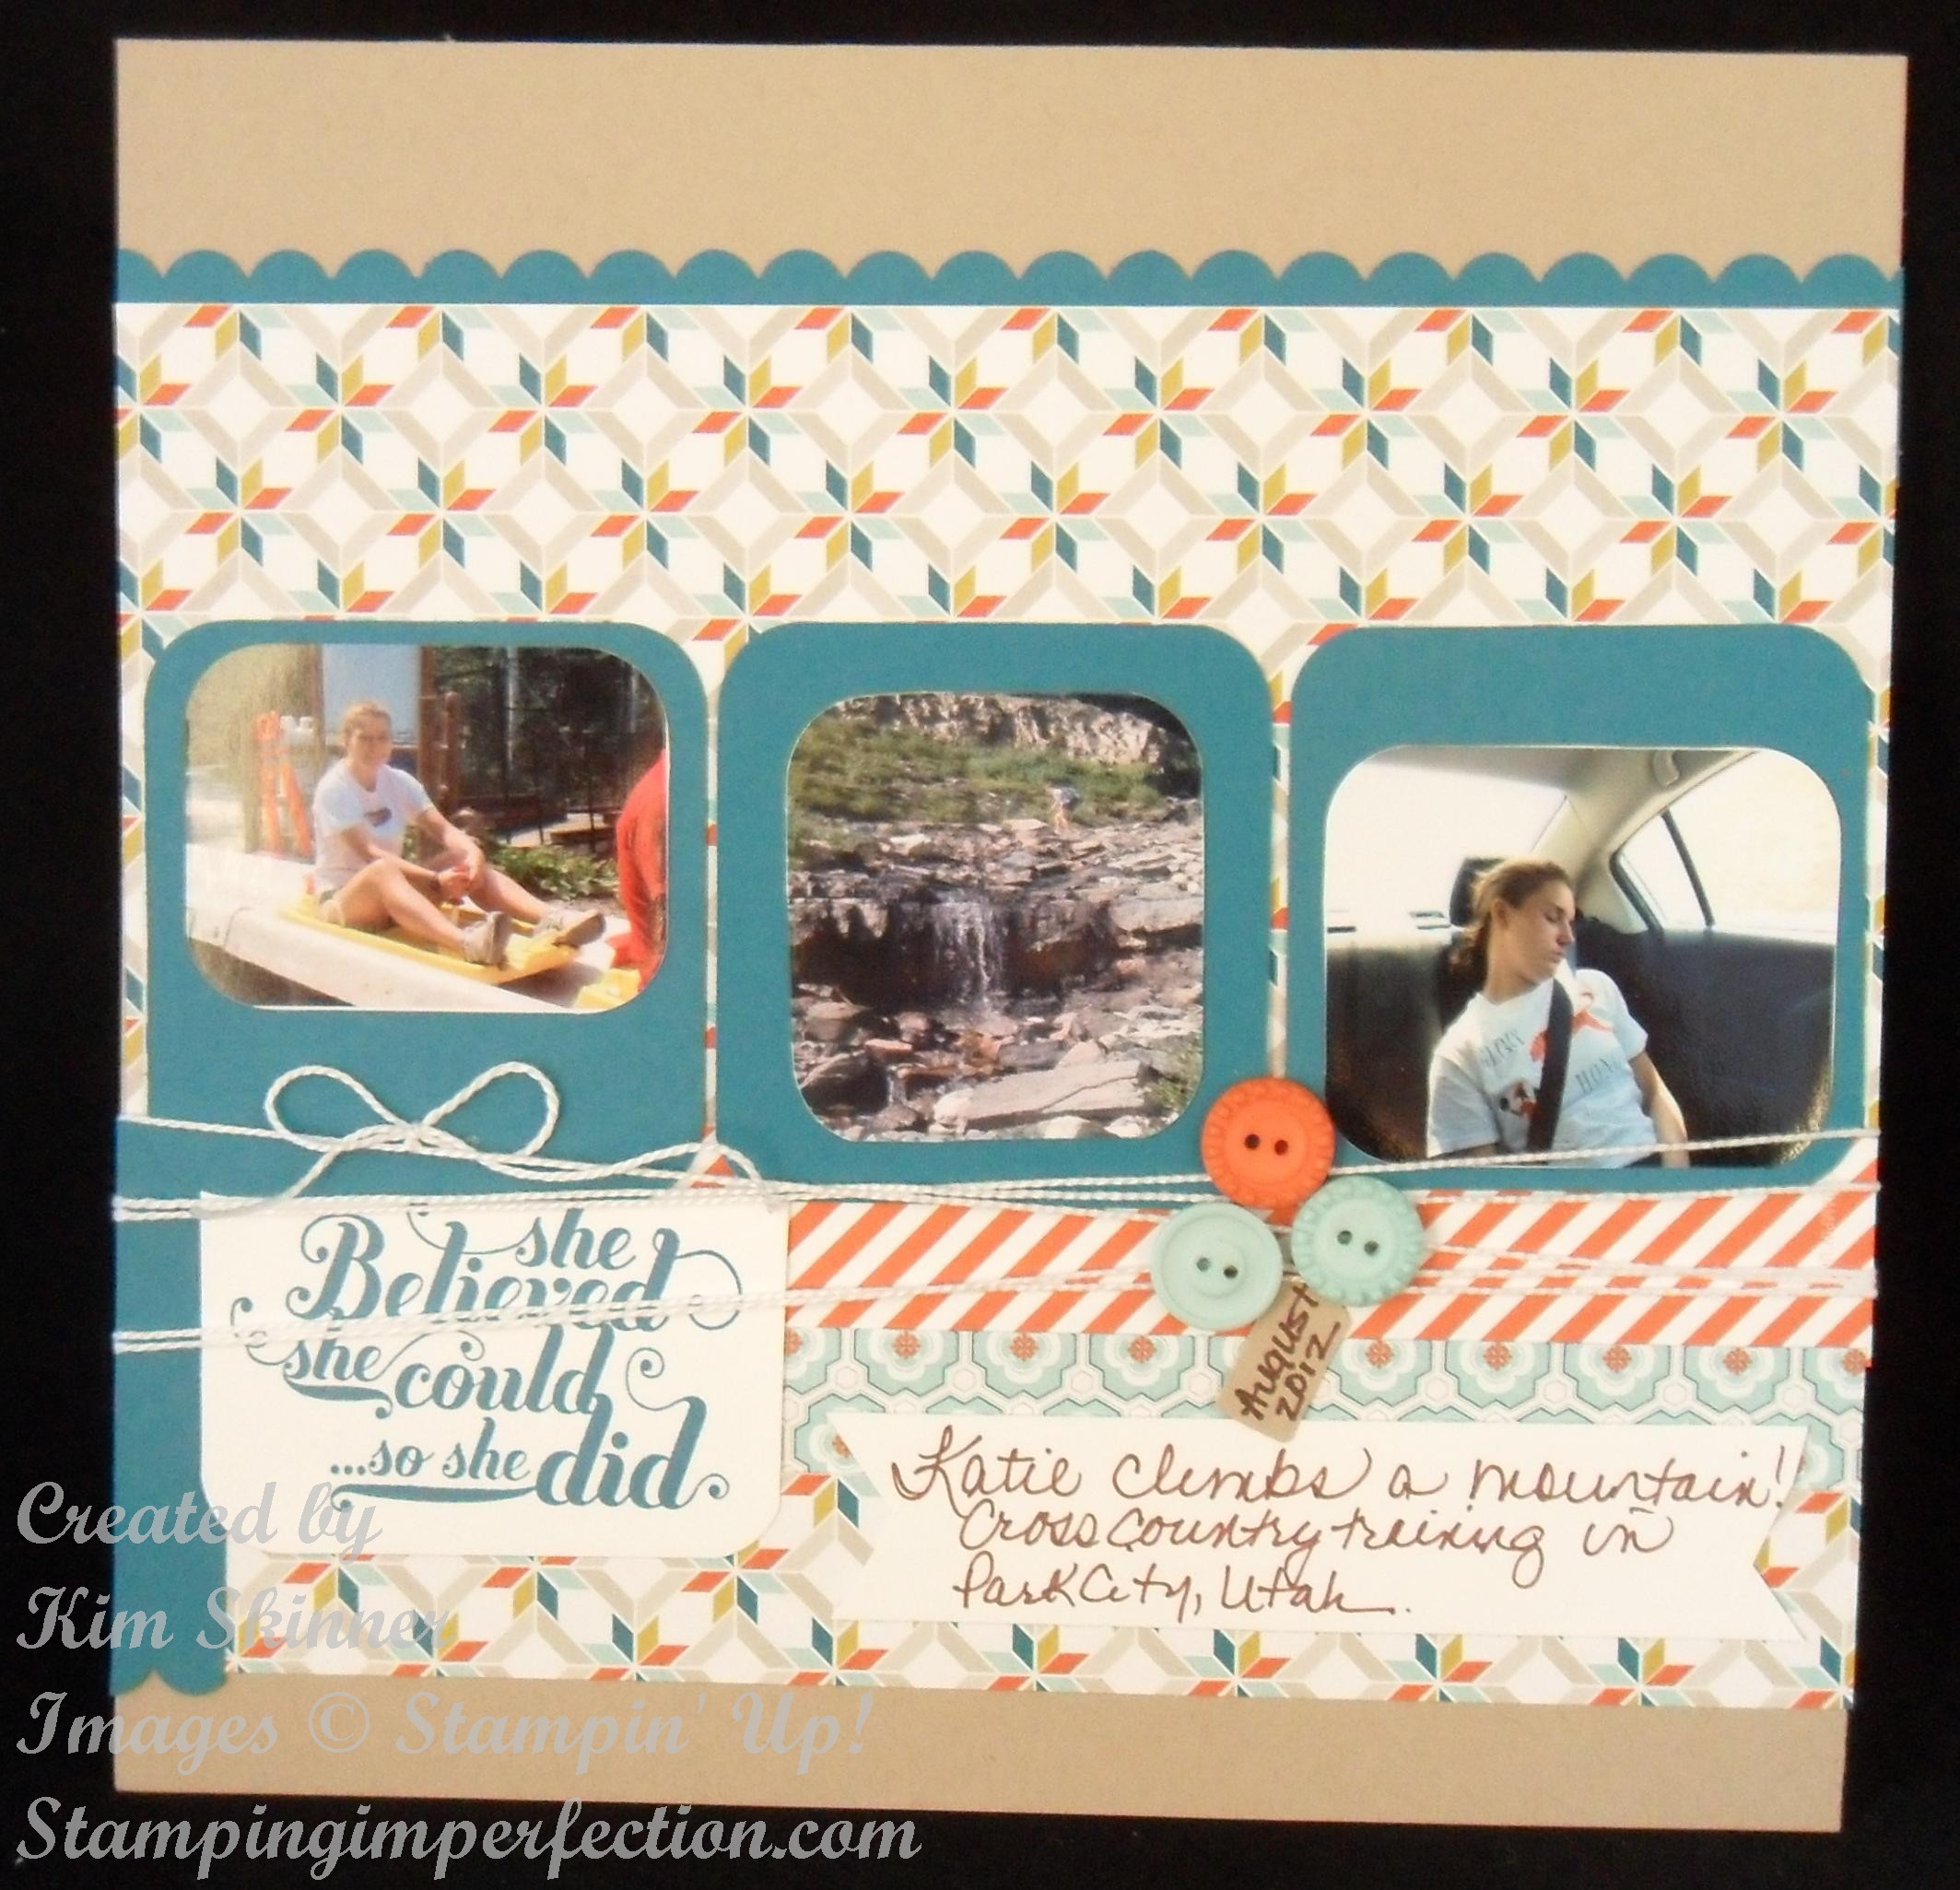 Scrapbook Layout Share  32 Scrapbooking Ideas to Inspire You! - Playing  with Paper